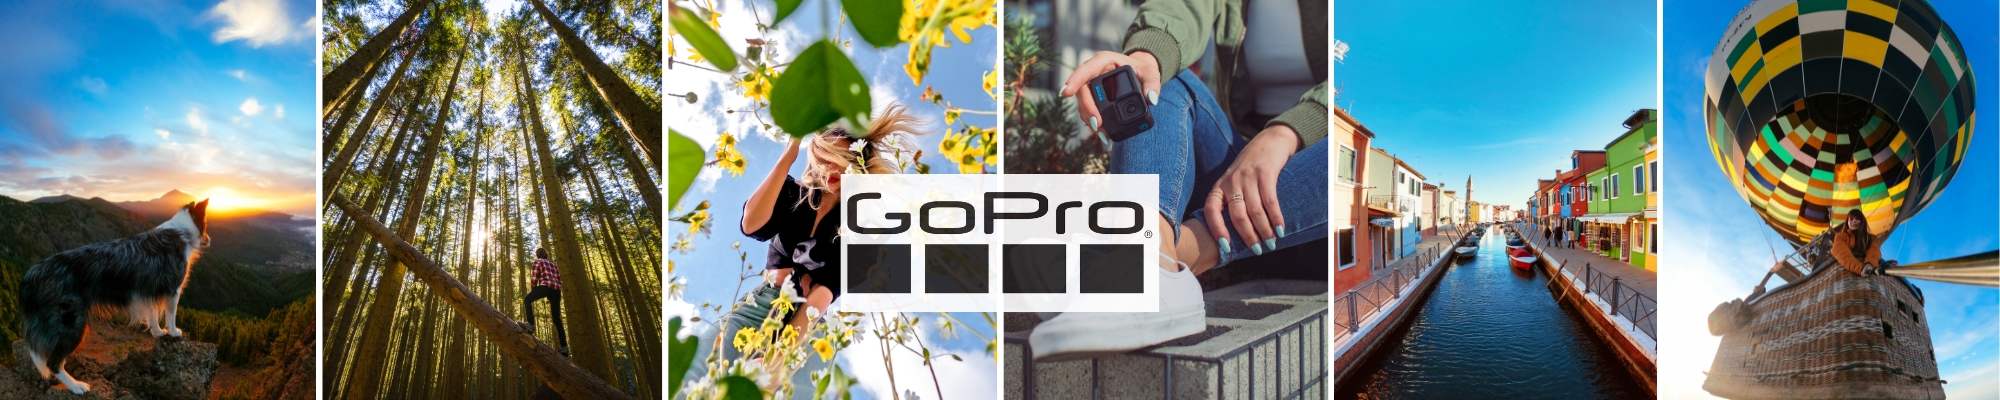 GoPro Lifestyle Shoppers Guide